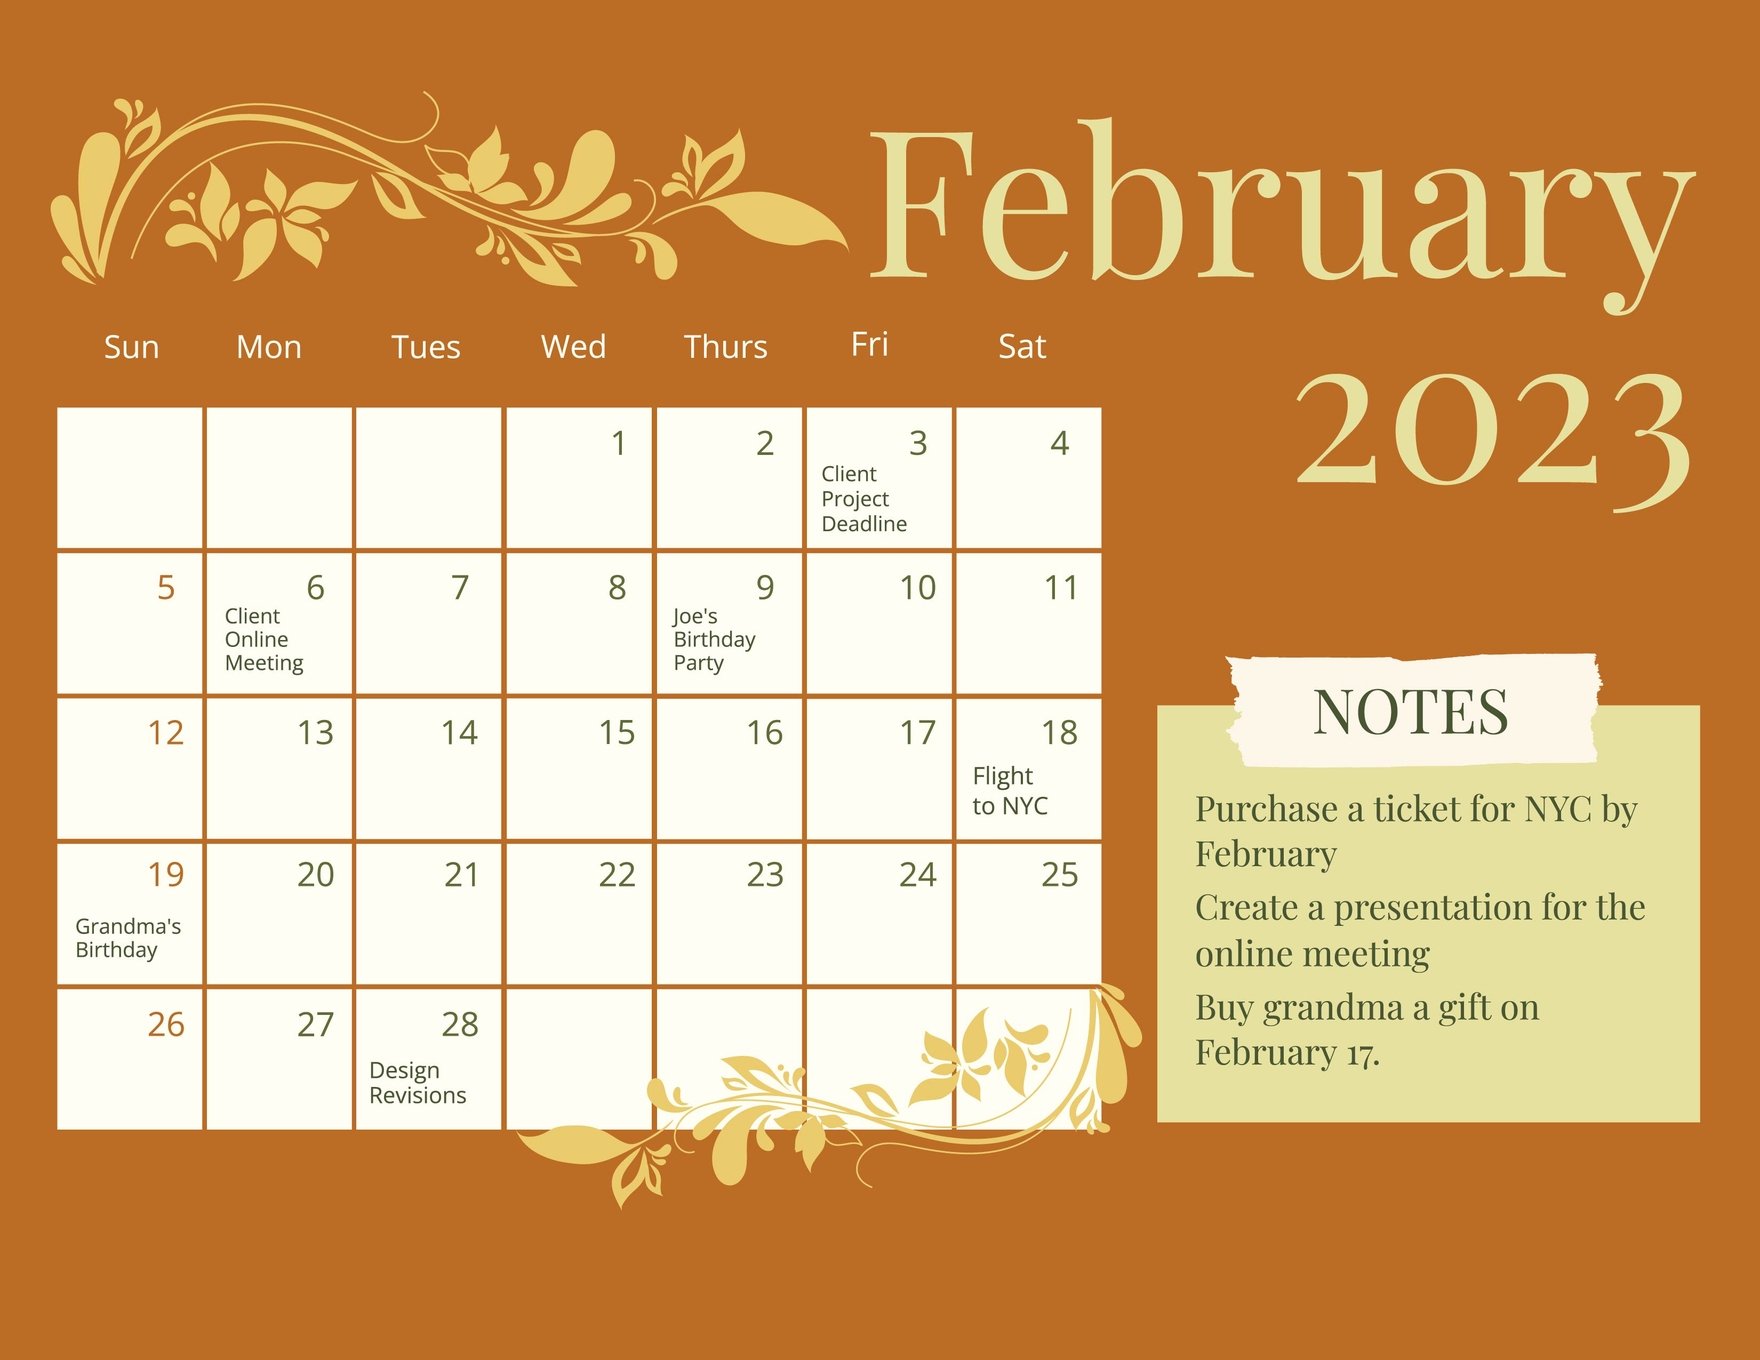 Free Fancy February 2023 Calendar in Word, Google Docs, Illustrator, PSD, Apple Pages